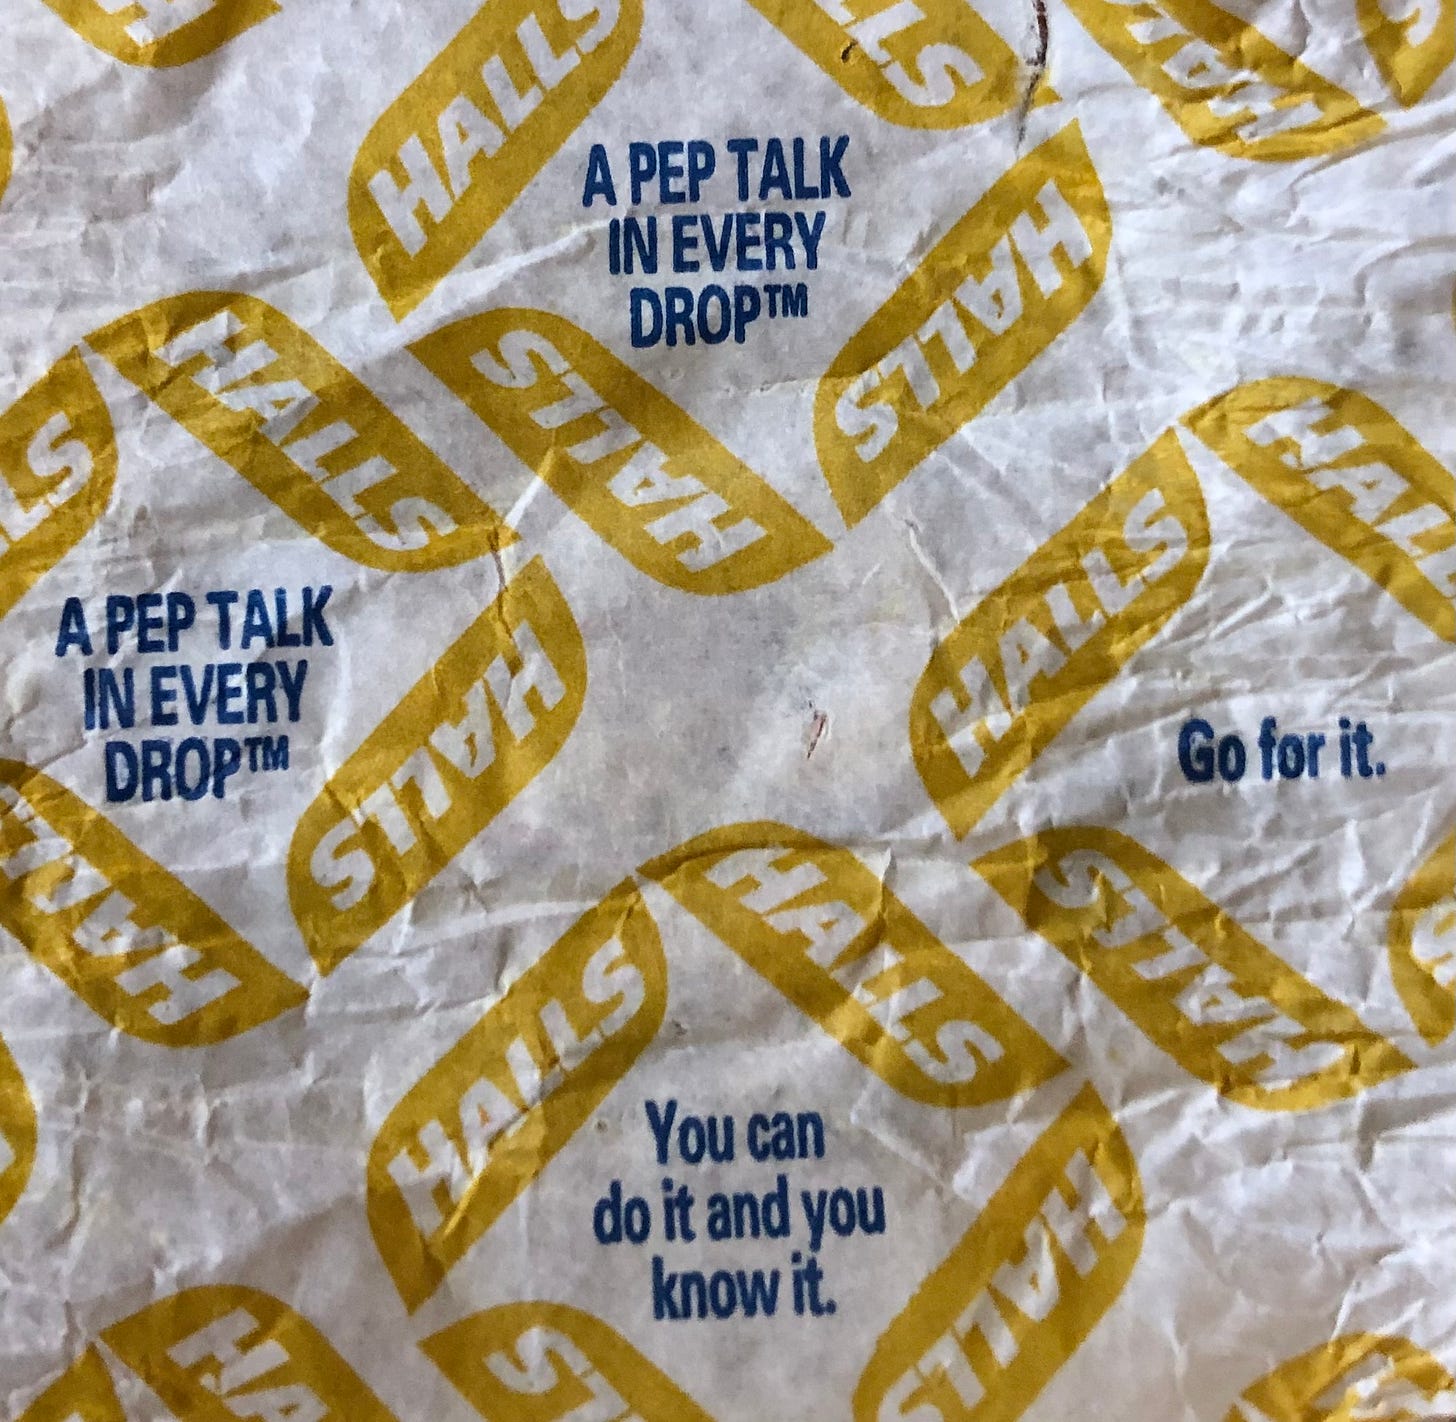 A cough drop wrapper that says, “a pepe talk in every drop” and “Go for it.”